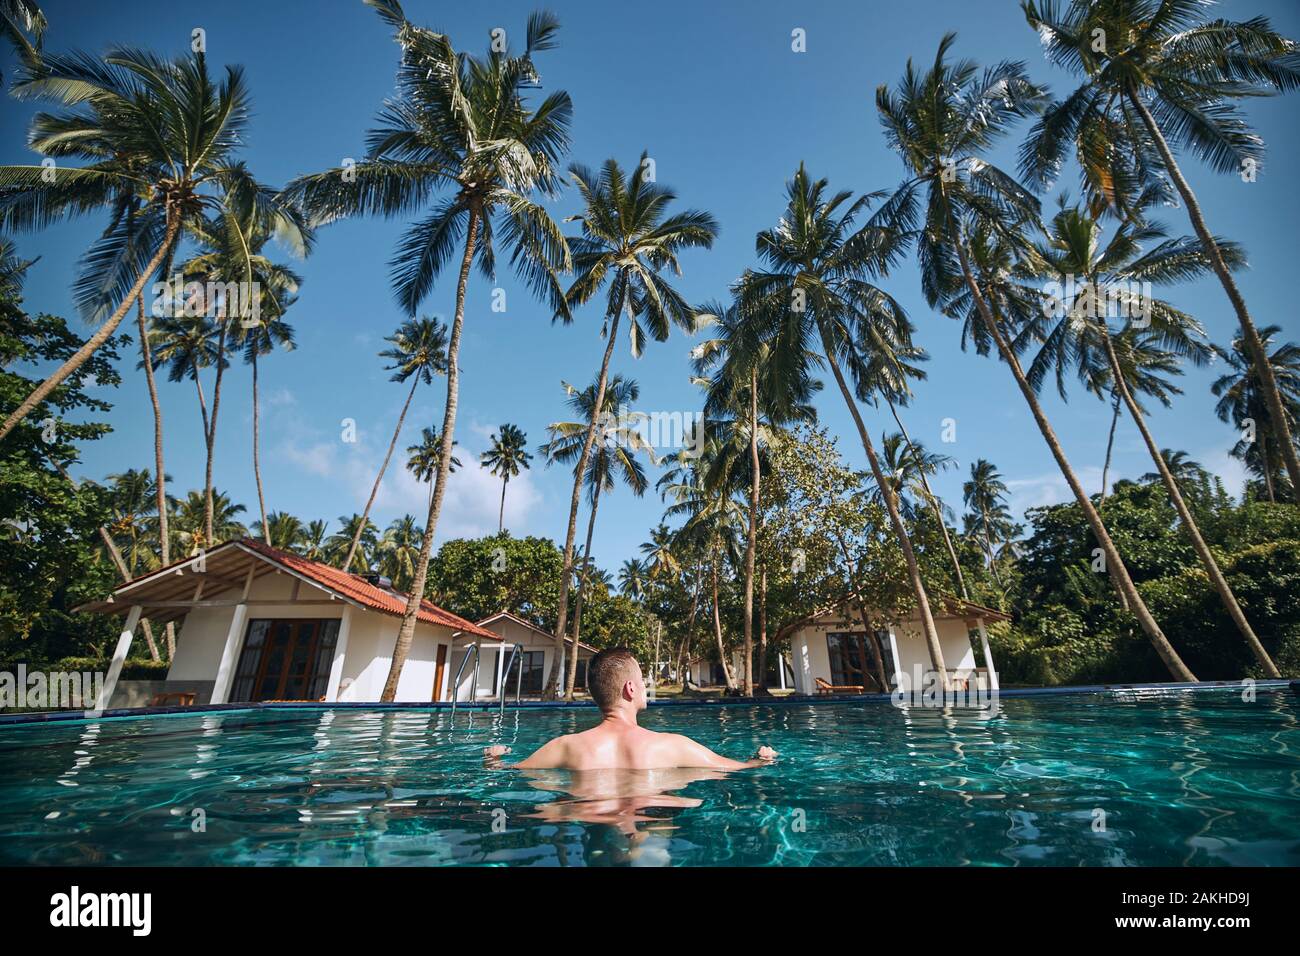 Relaxation in swimming pool in the middle of coconut palm trees. Young man resting in water against bungalows of tourist resort. Stock Photo